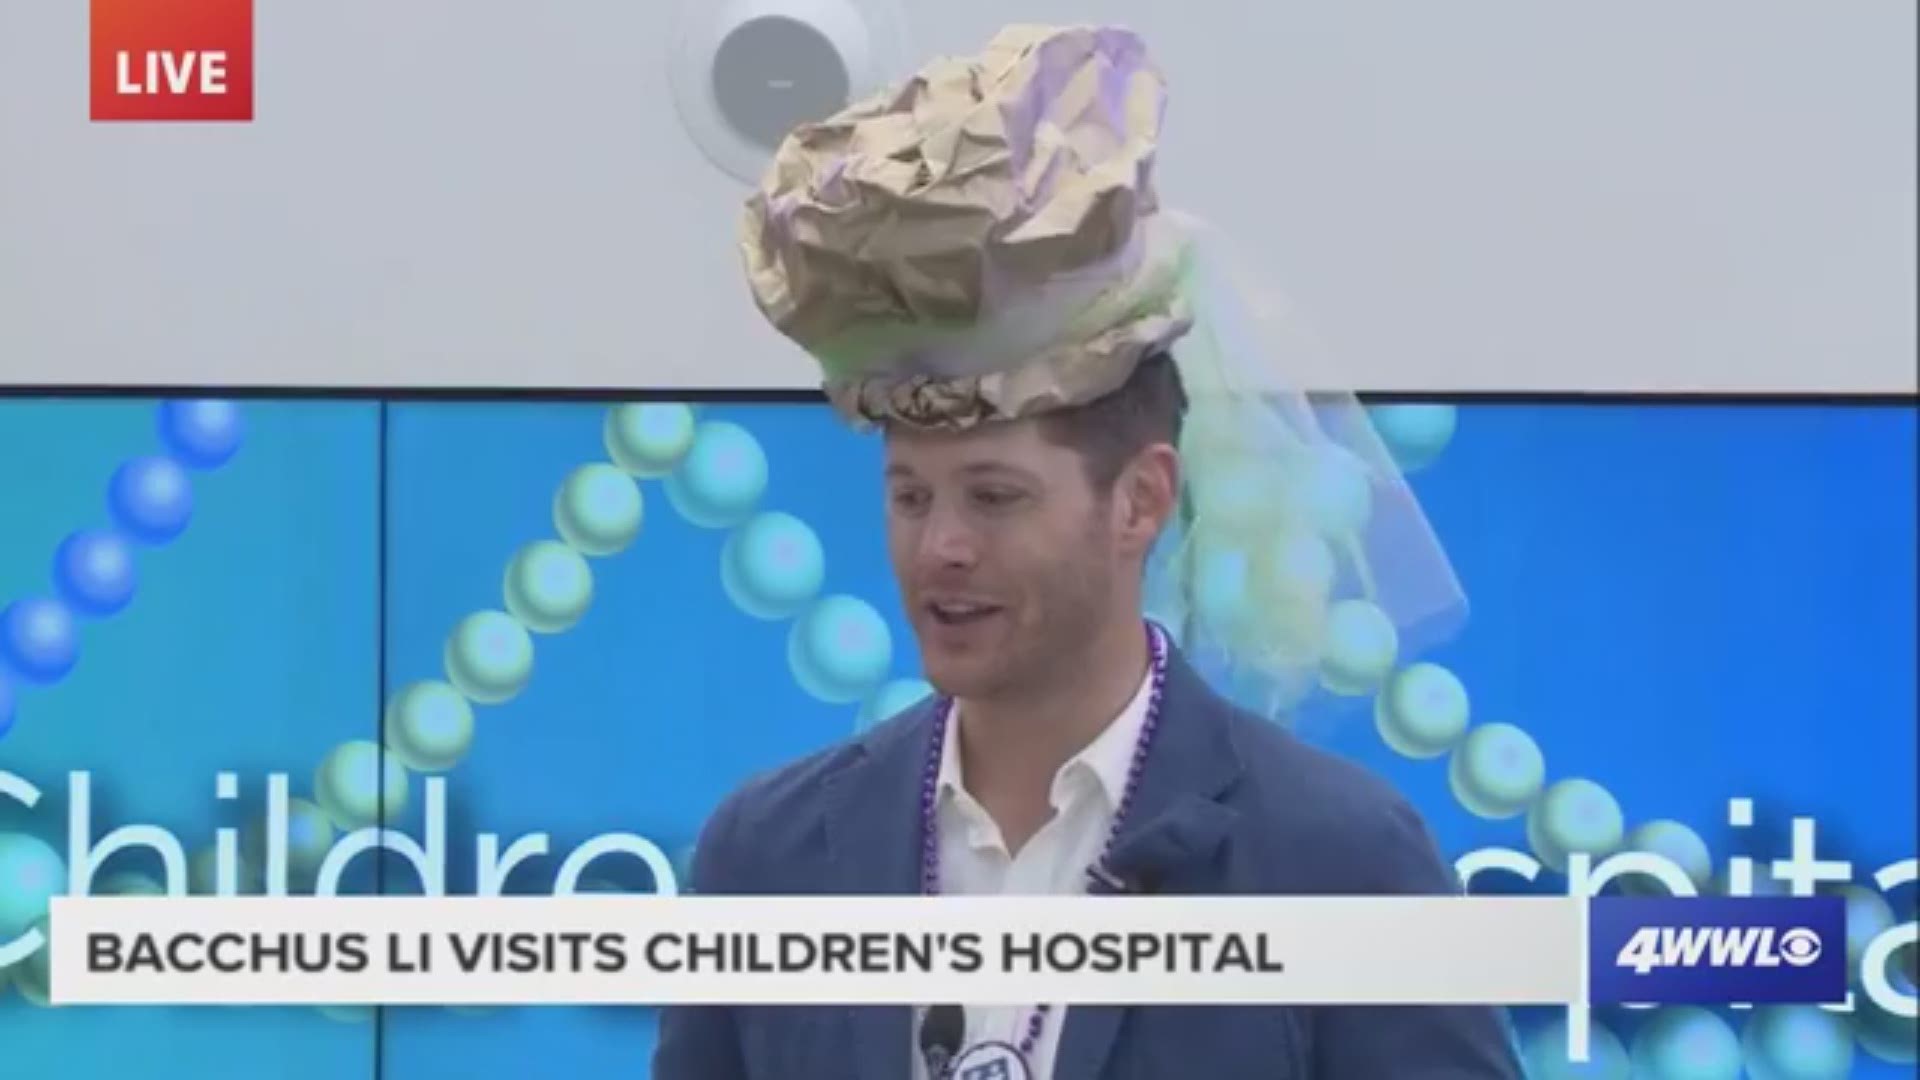 Bacchus LI, Jensen Ackles, made his annual stop at Children's Hospital on the Friday before the parade.